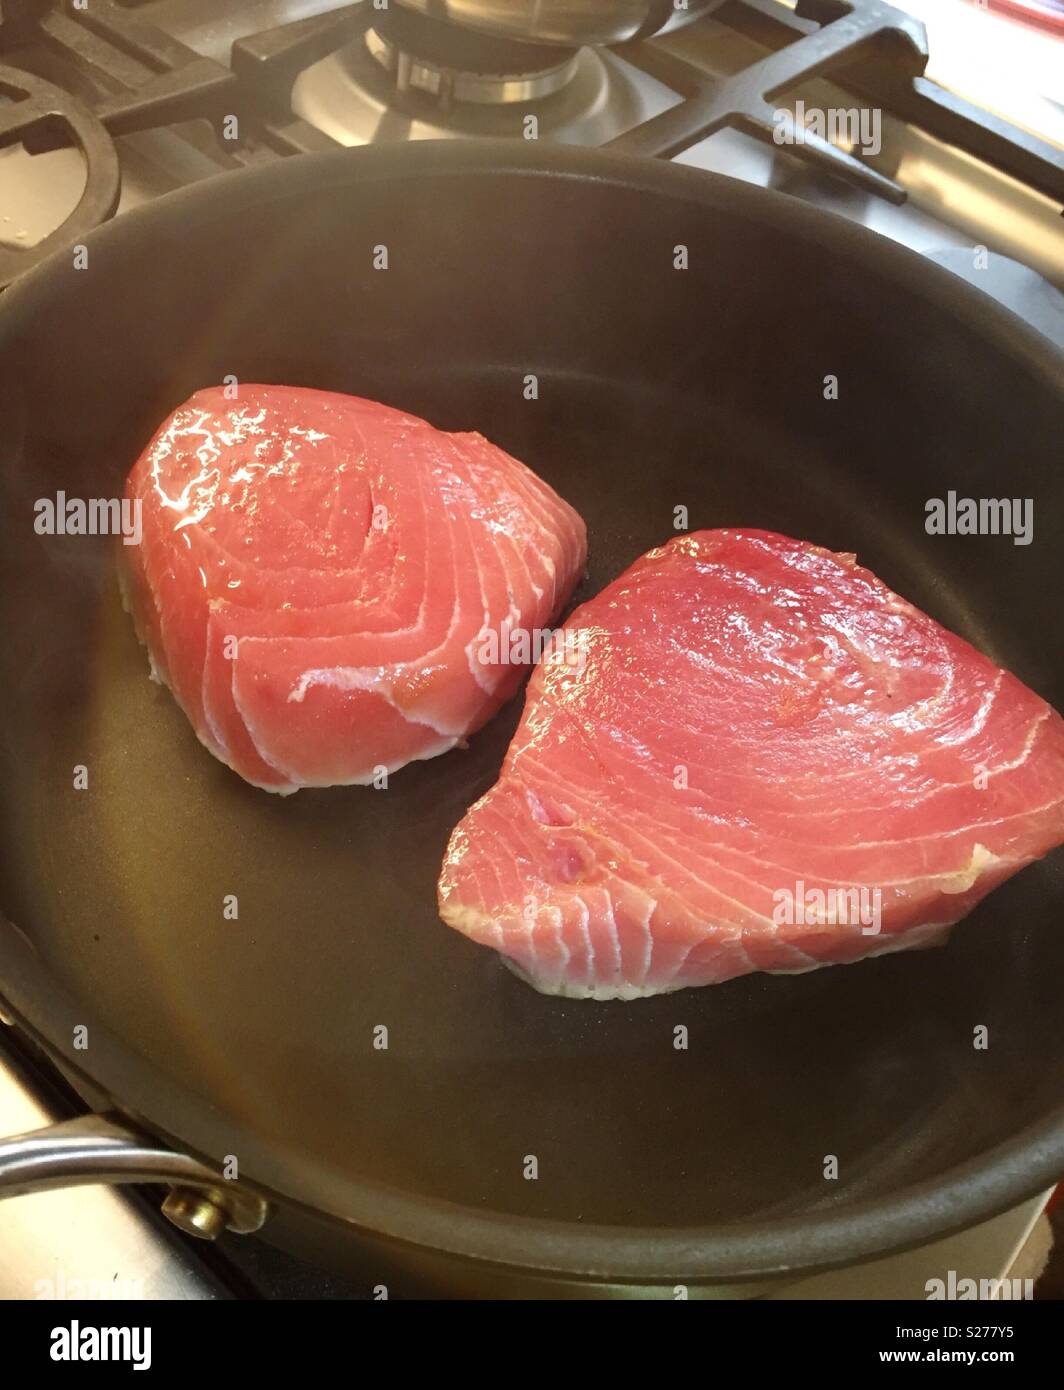 Slices of fresh tuna searing in a hot skillet, USAA Stock Photo